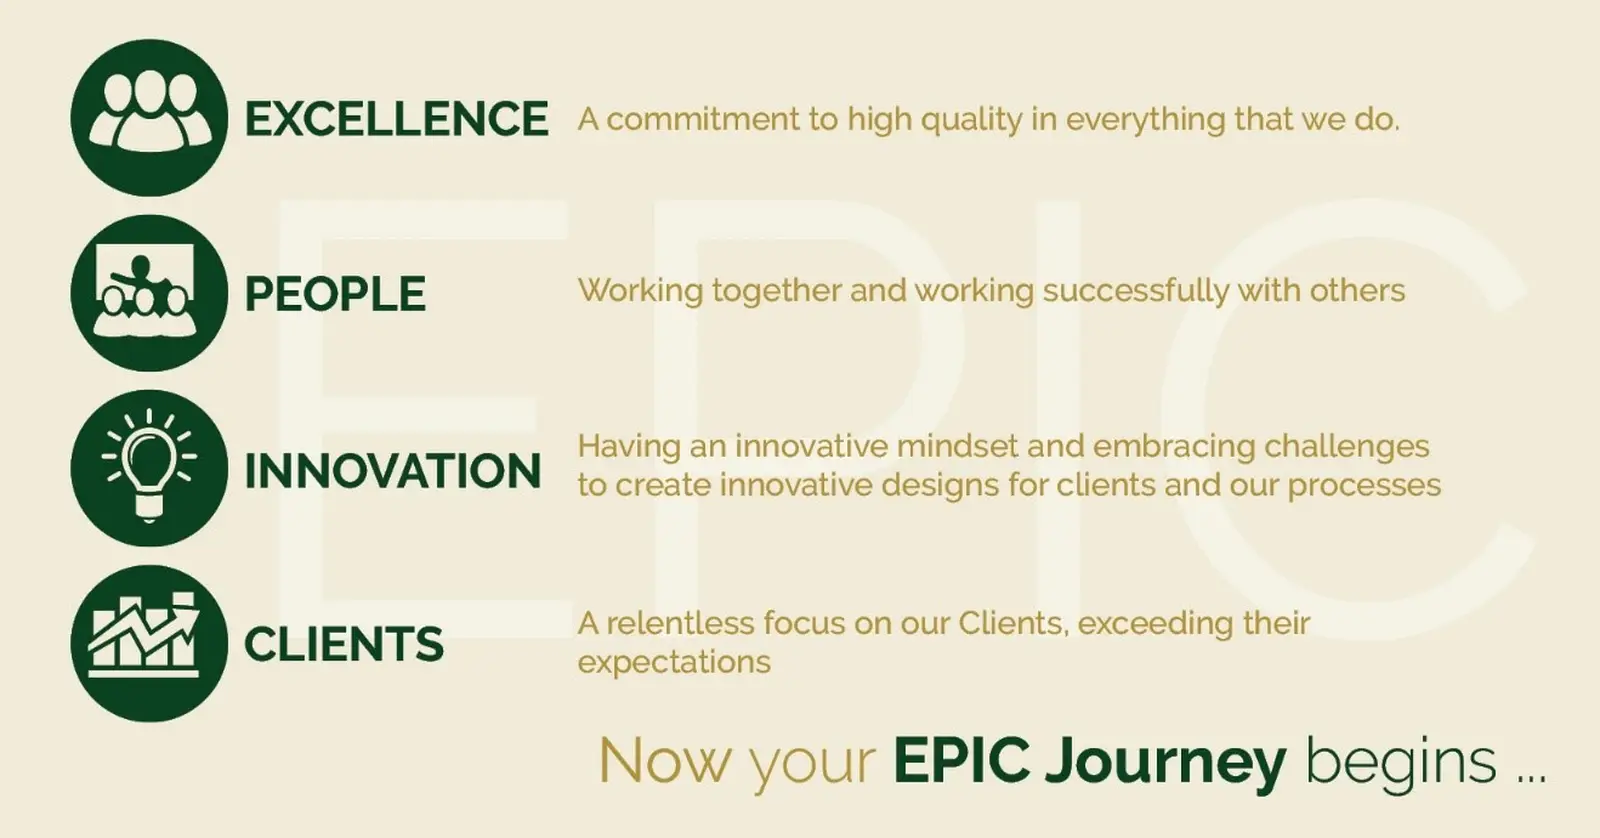 Values Our values differentiate and focus us every day to be EPIC - for our people and our customers.